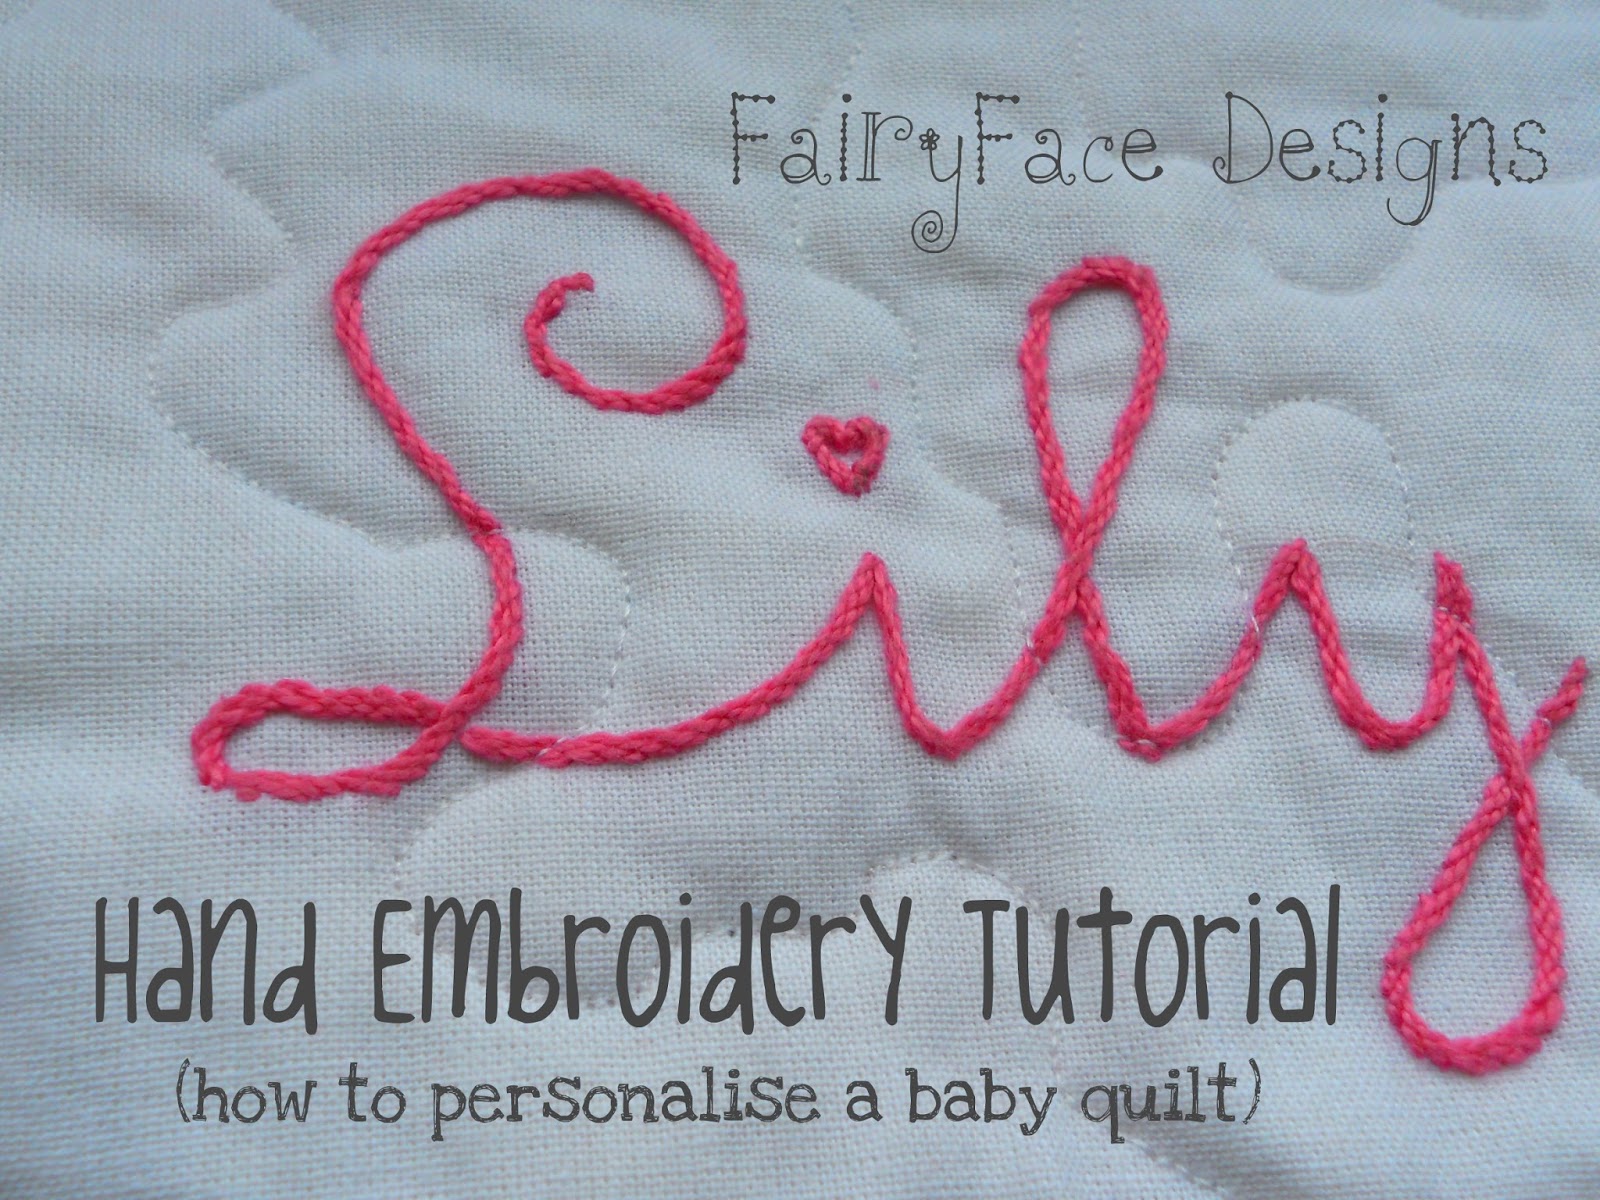 FairyFace Designs: Hand Embroidery Tutorial: How to Personalise a